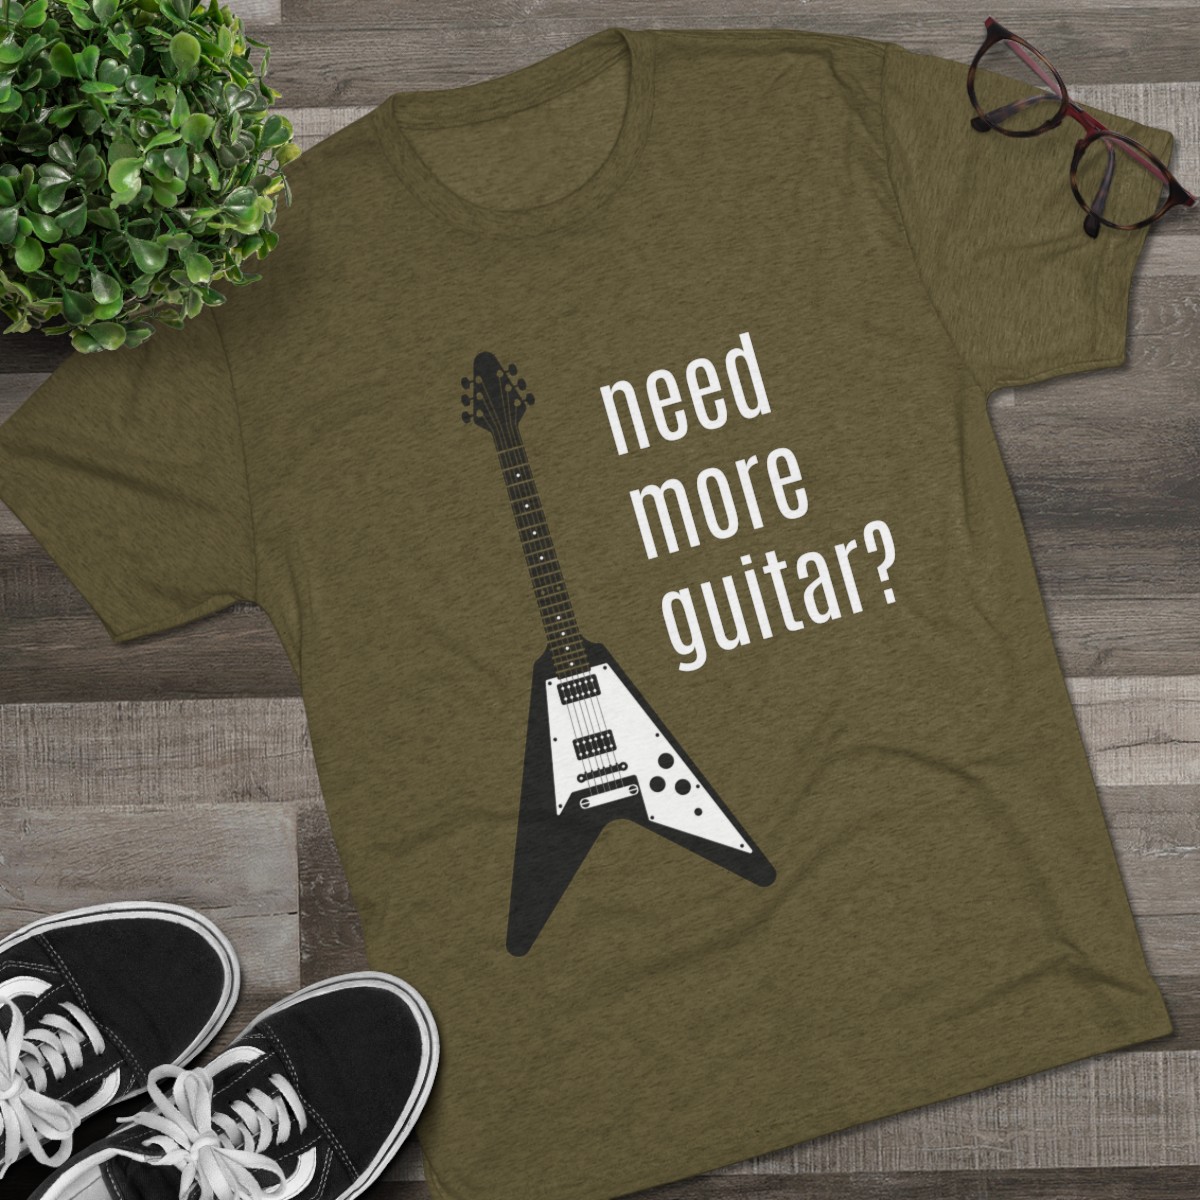 THE ZOO Tri-Blend Crew Tee "need more guitar?" product thumbnail image